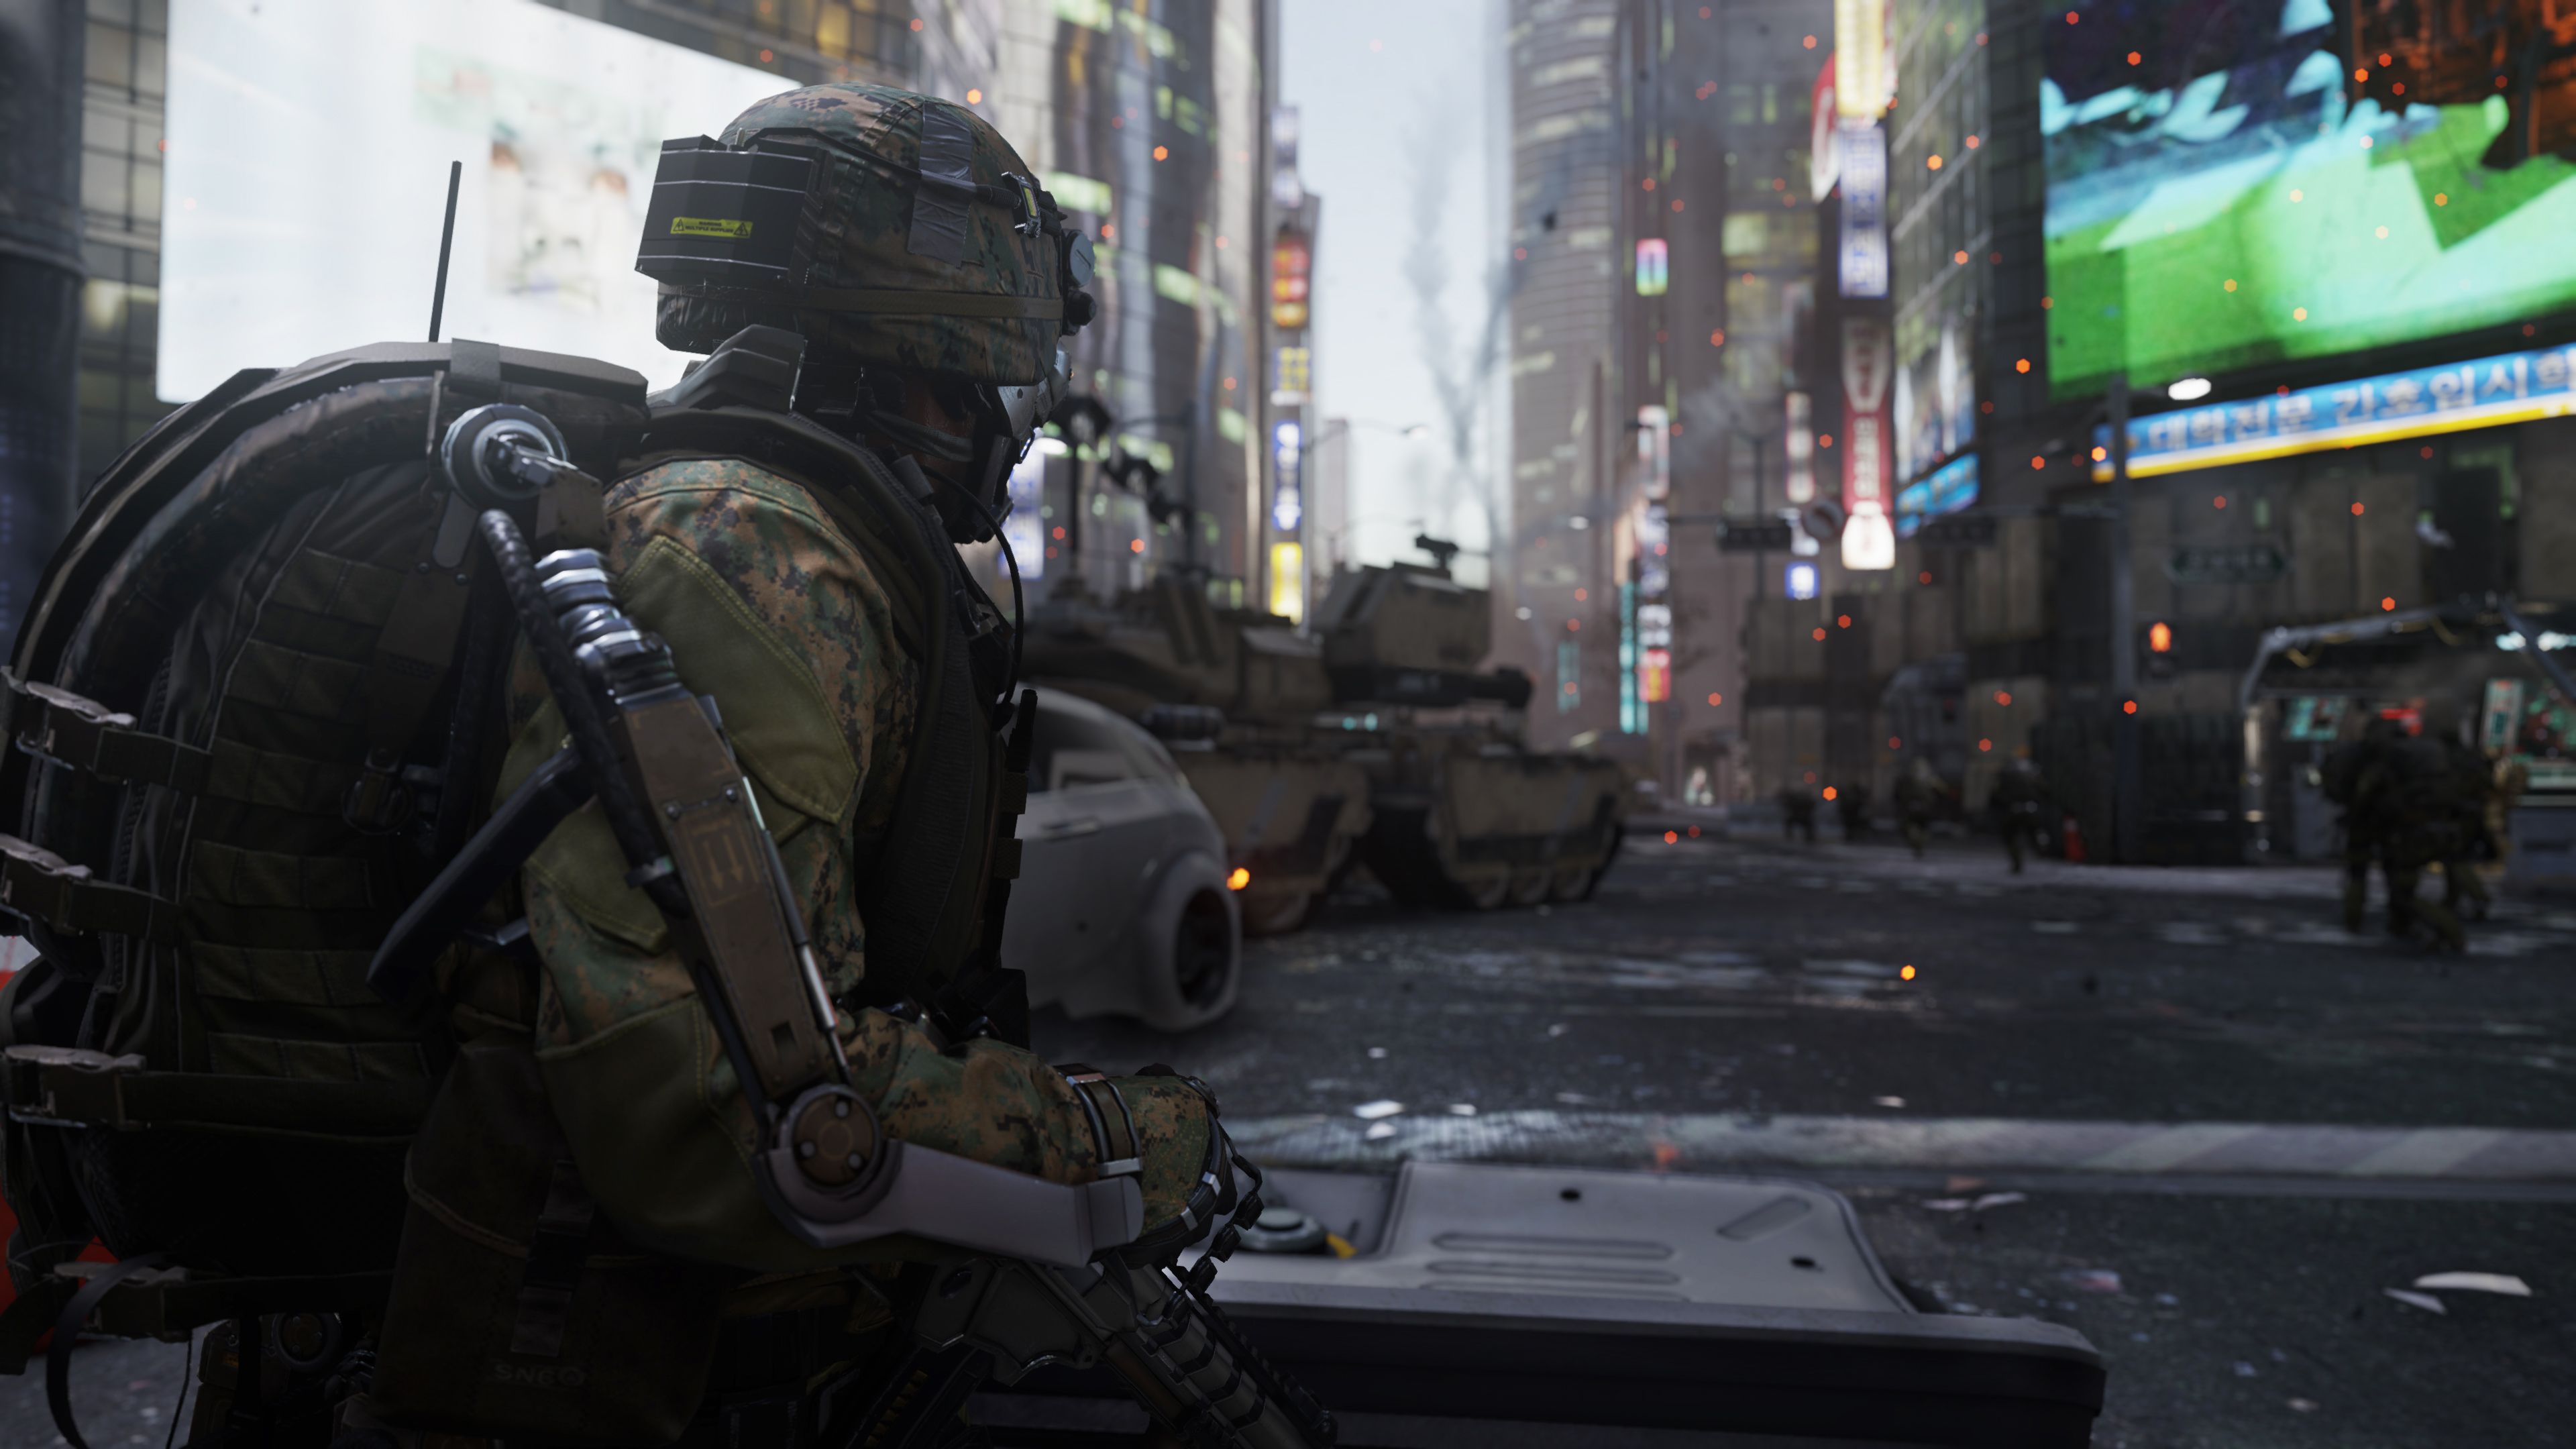 call of duty advanced warfare preview invisibility guns grenades and jetpacks in 2058 image 3